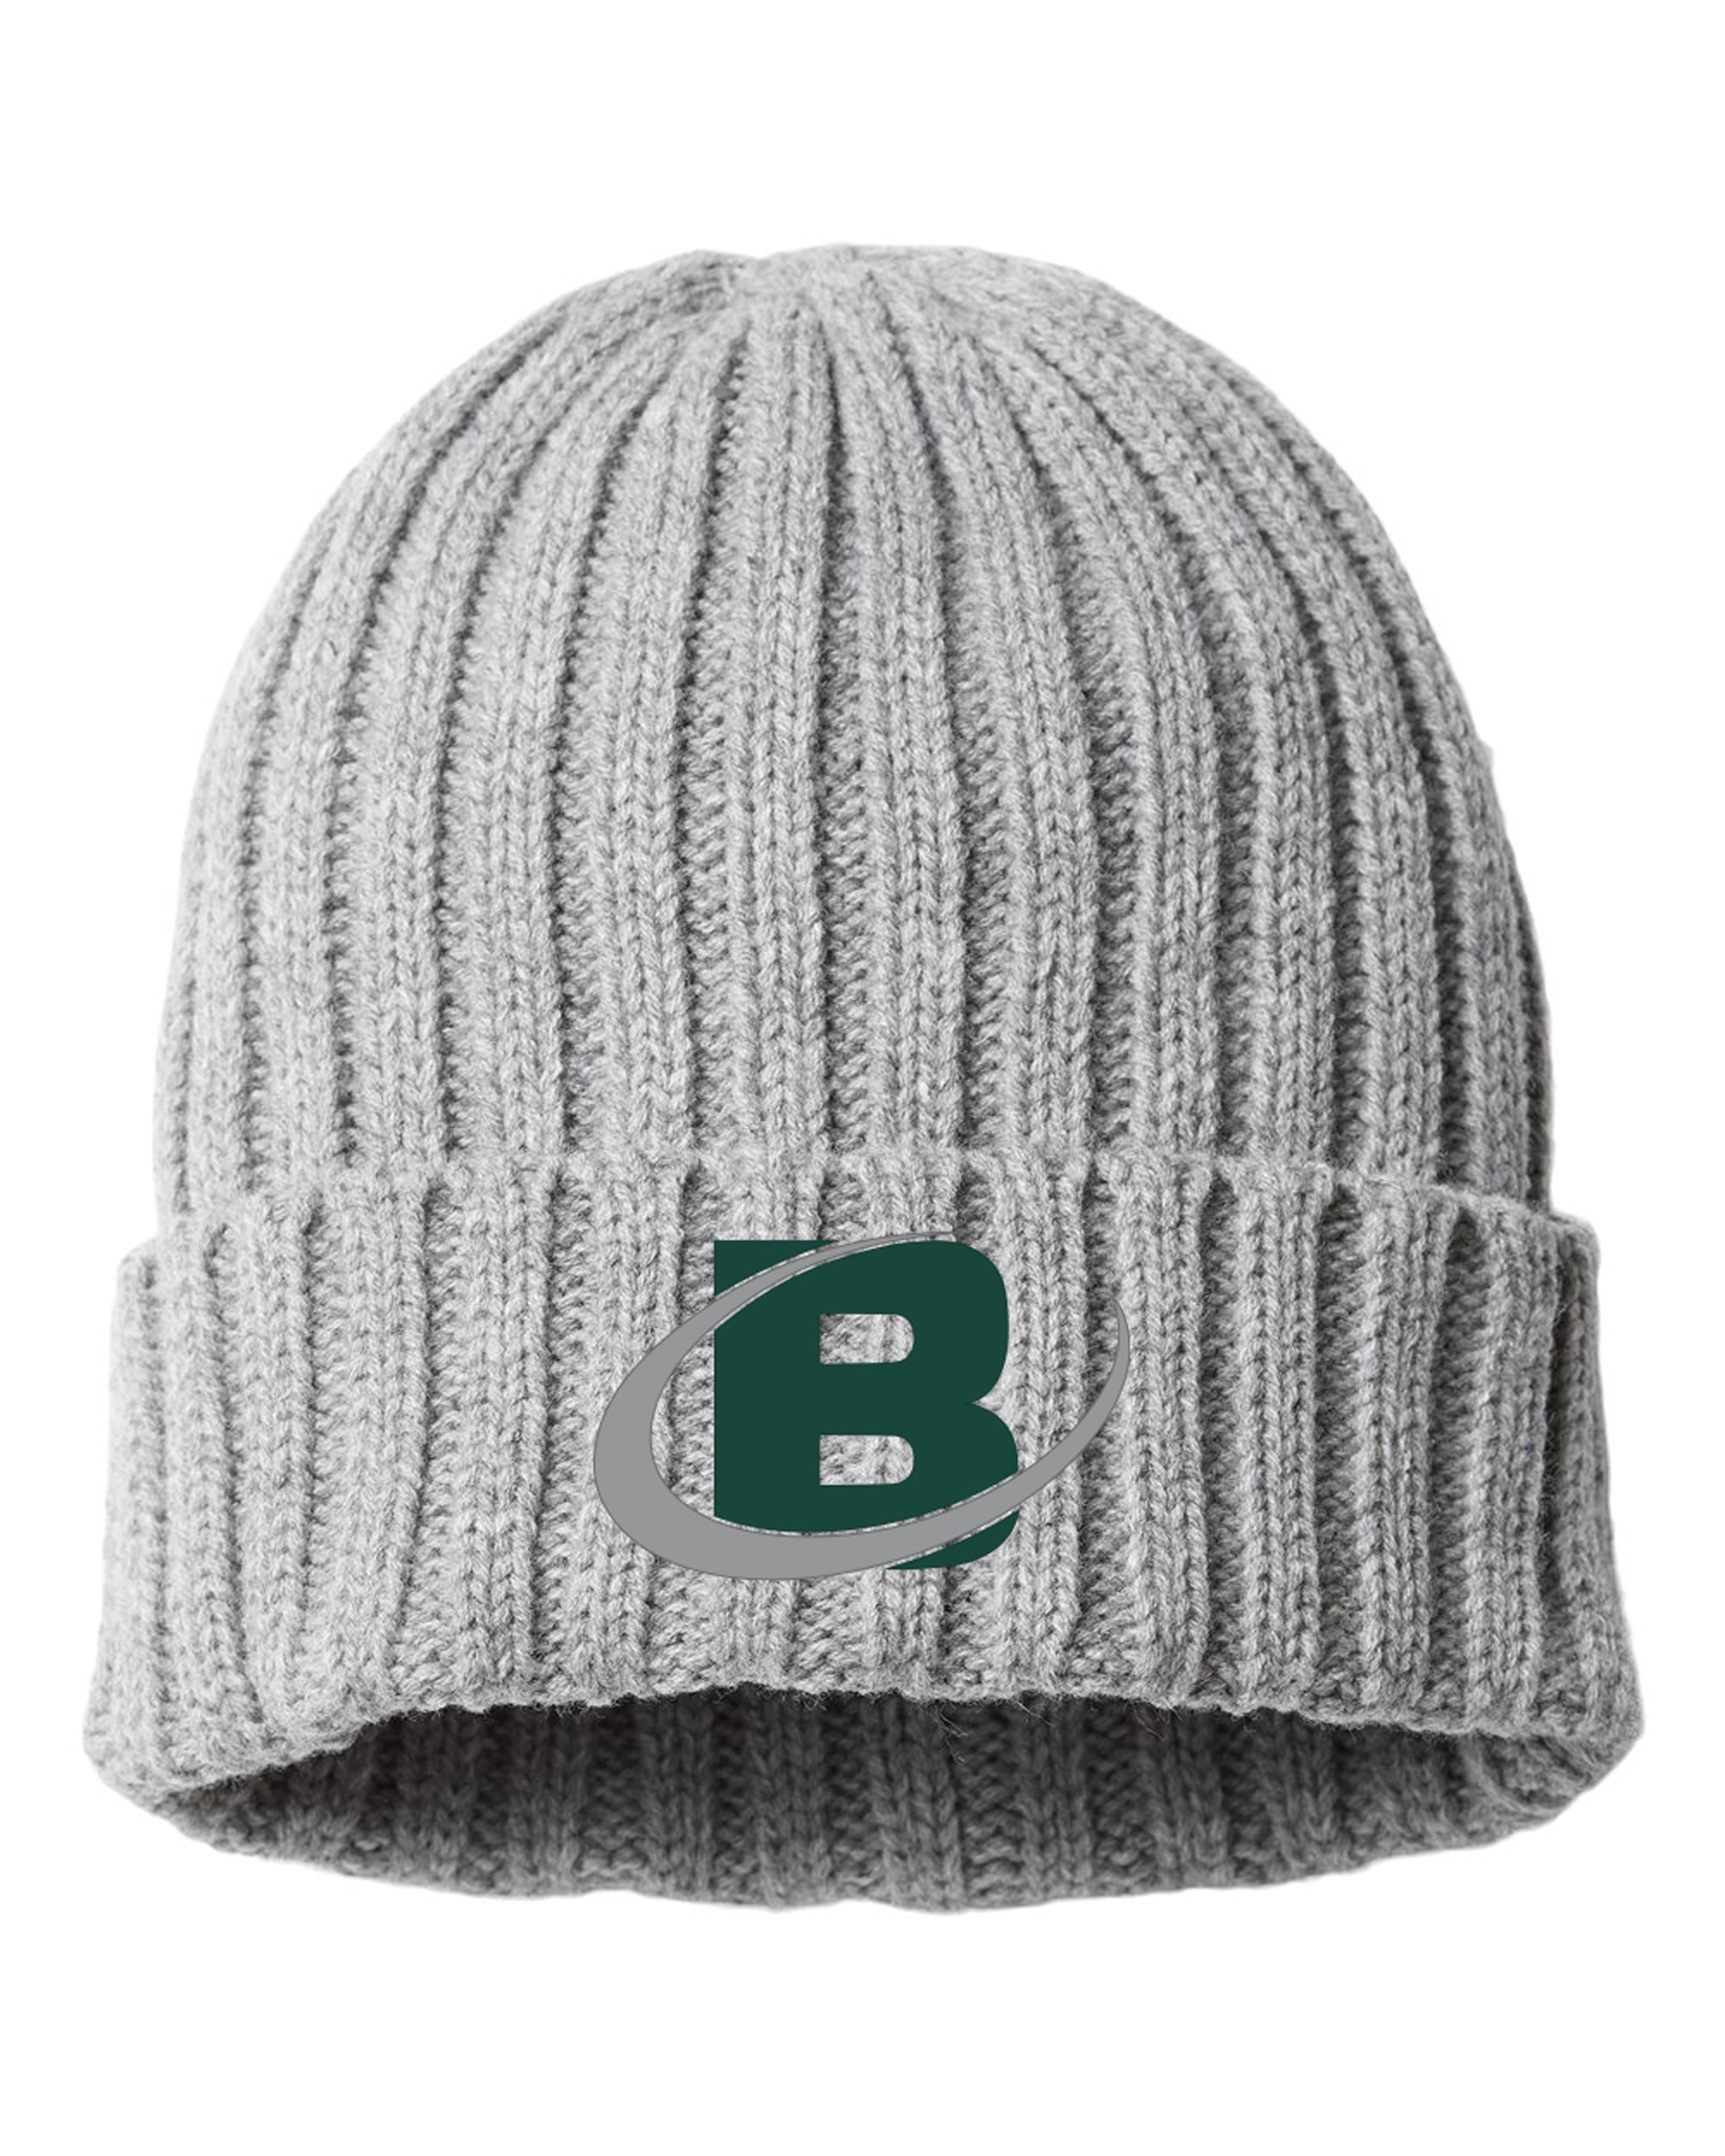 Bowman Turfgrass Professionals - Cable Knit Beanie